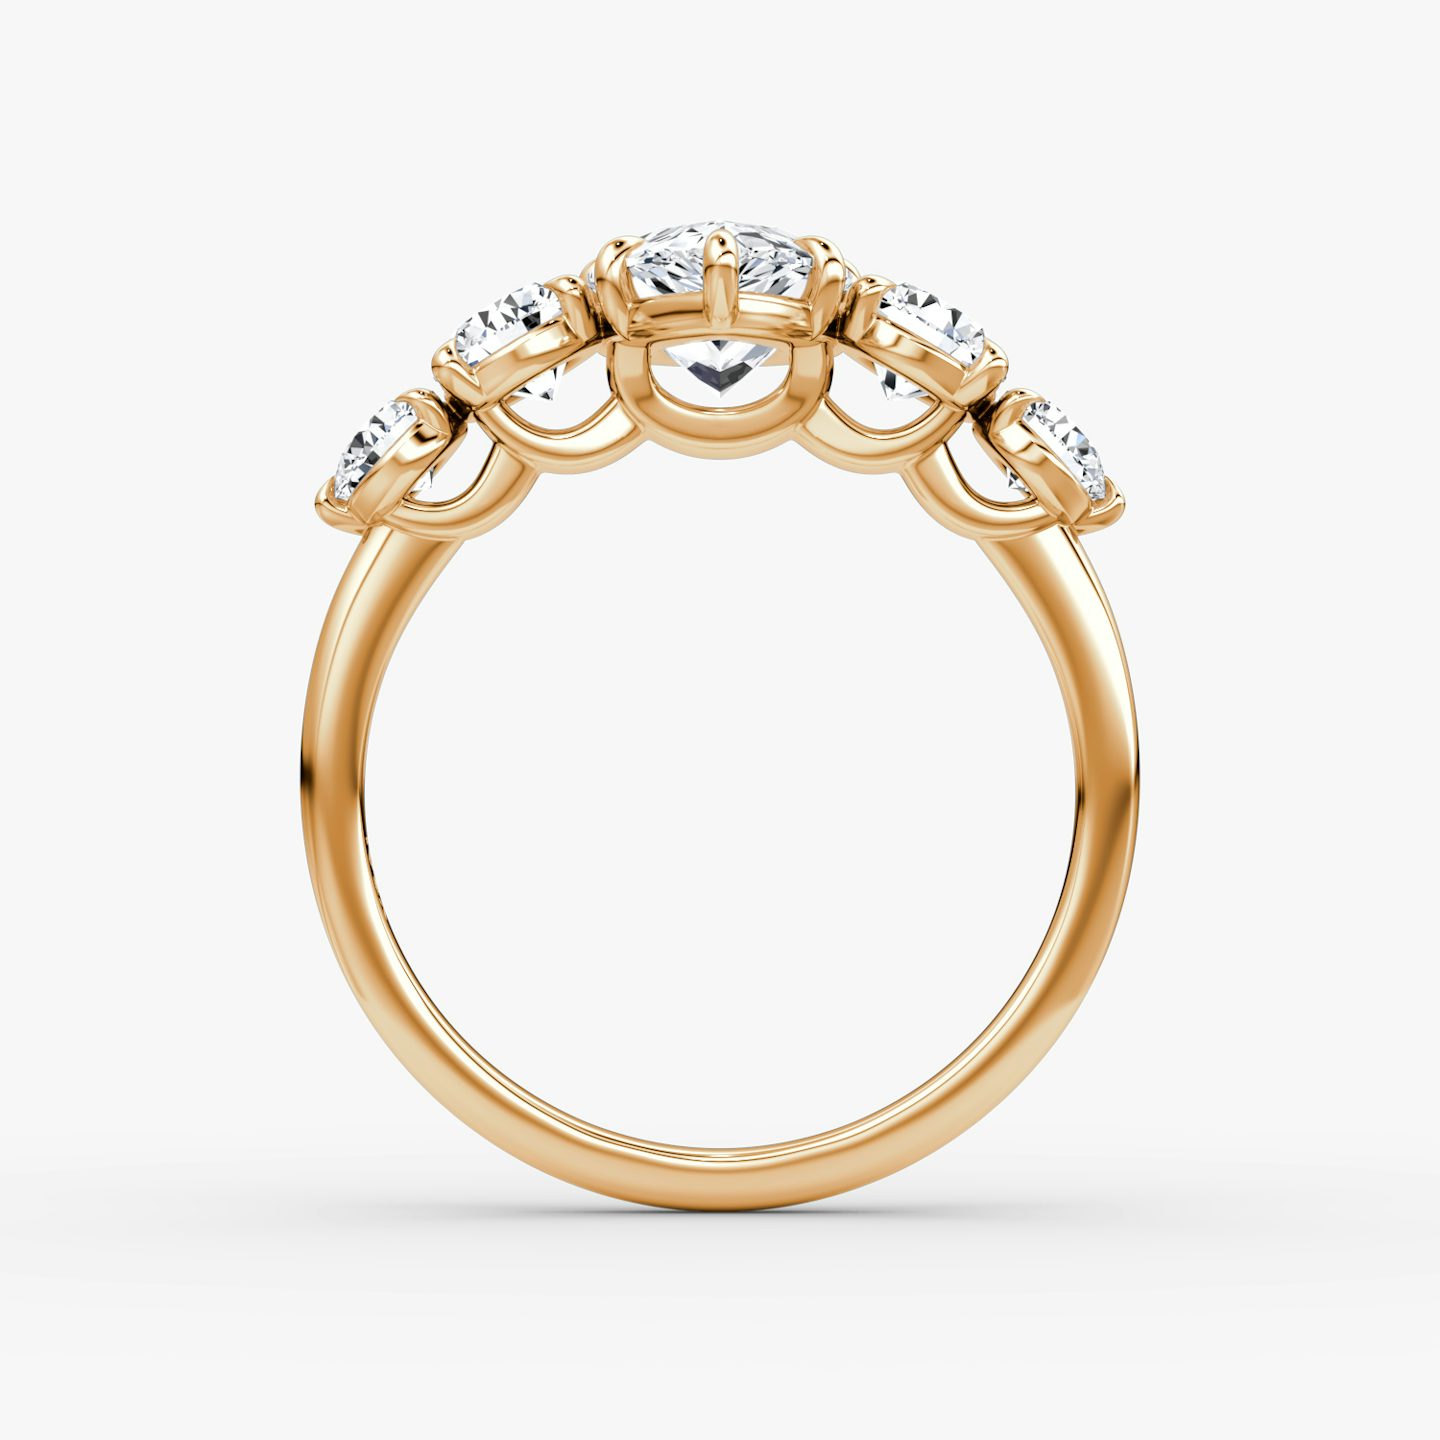 undefined | Poire | 14k | Or rose | bandAccent: Simple | diamondOrientation: vertical | caratWeight: other